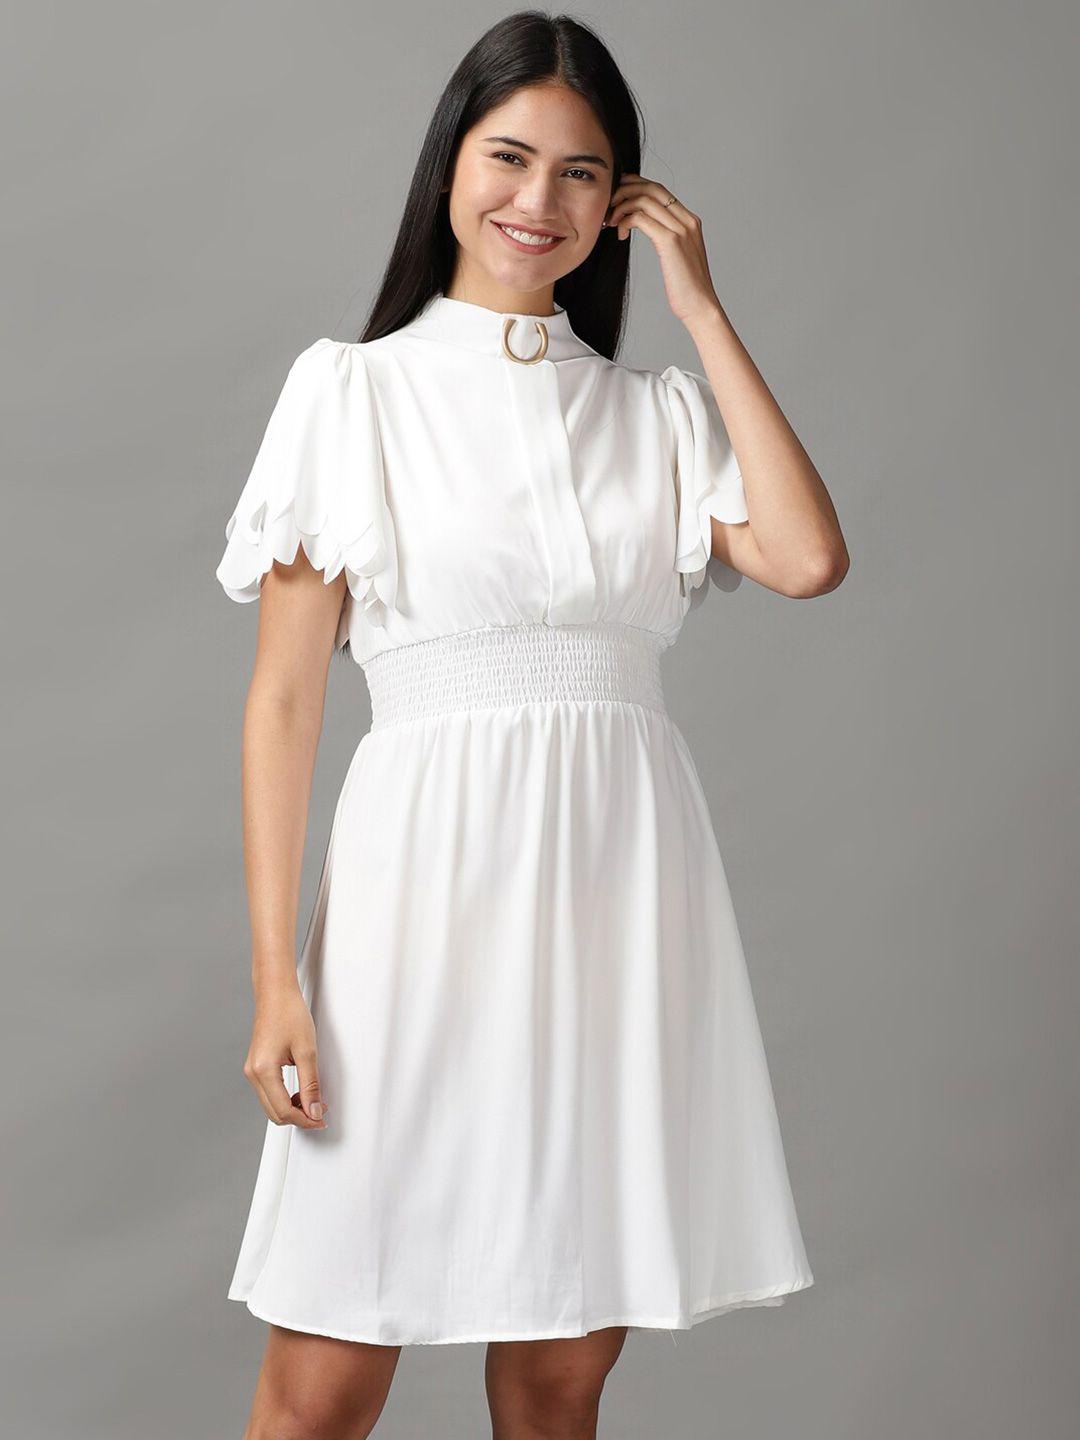 showoff-women-white-solid-dress